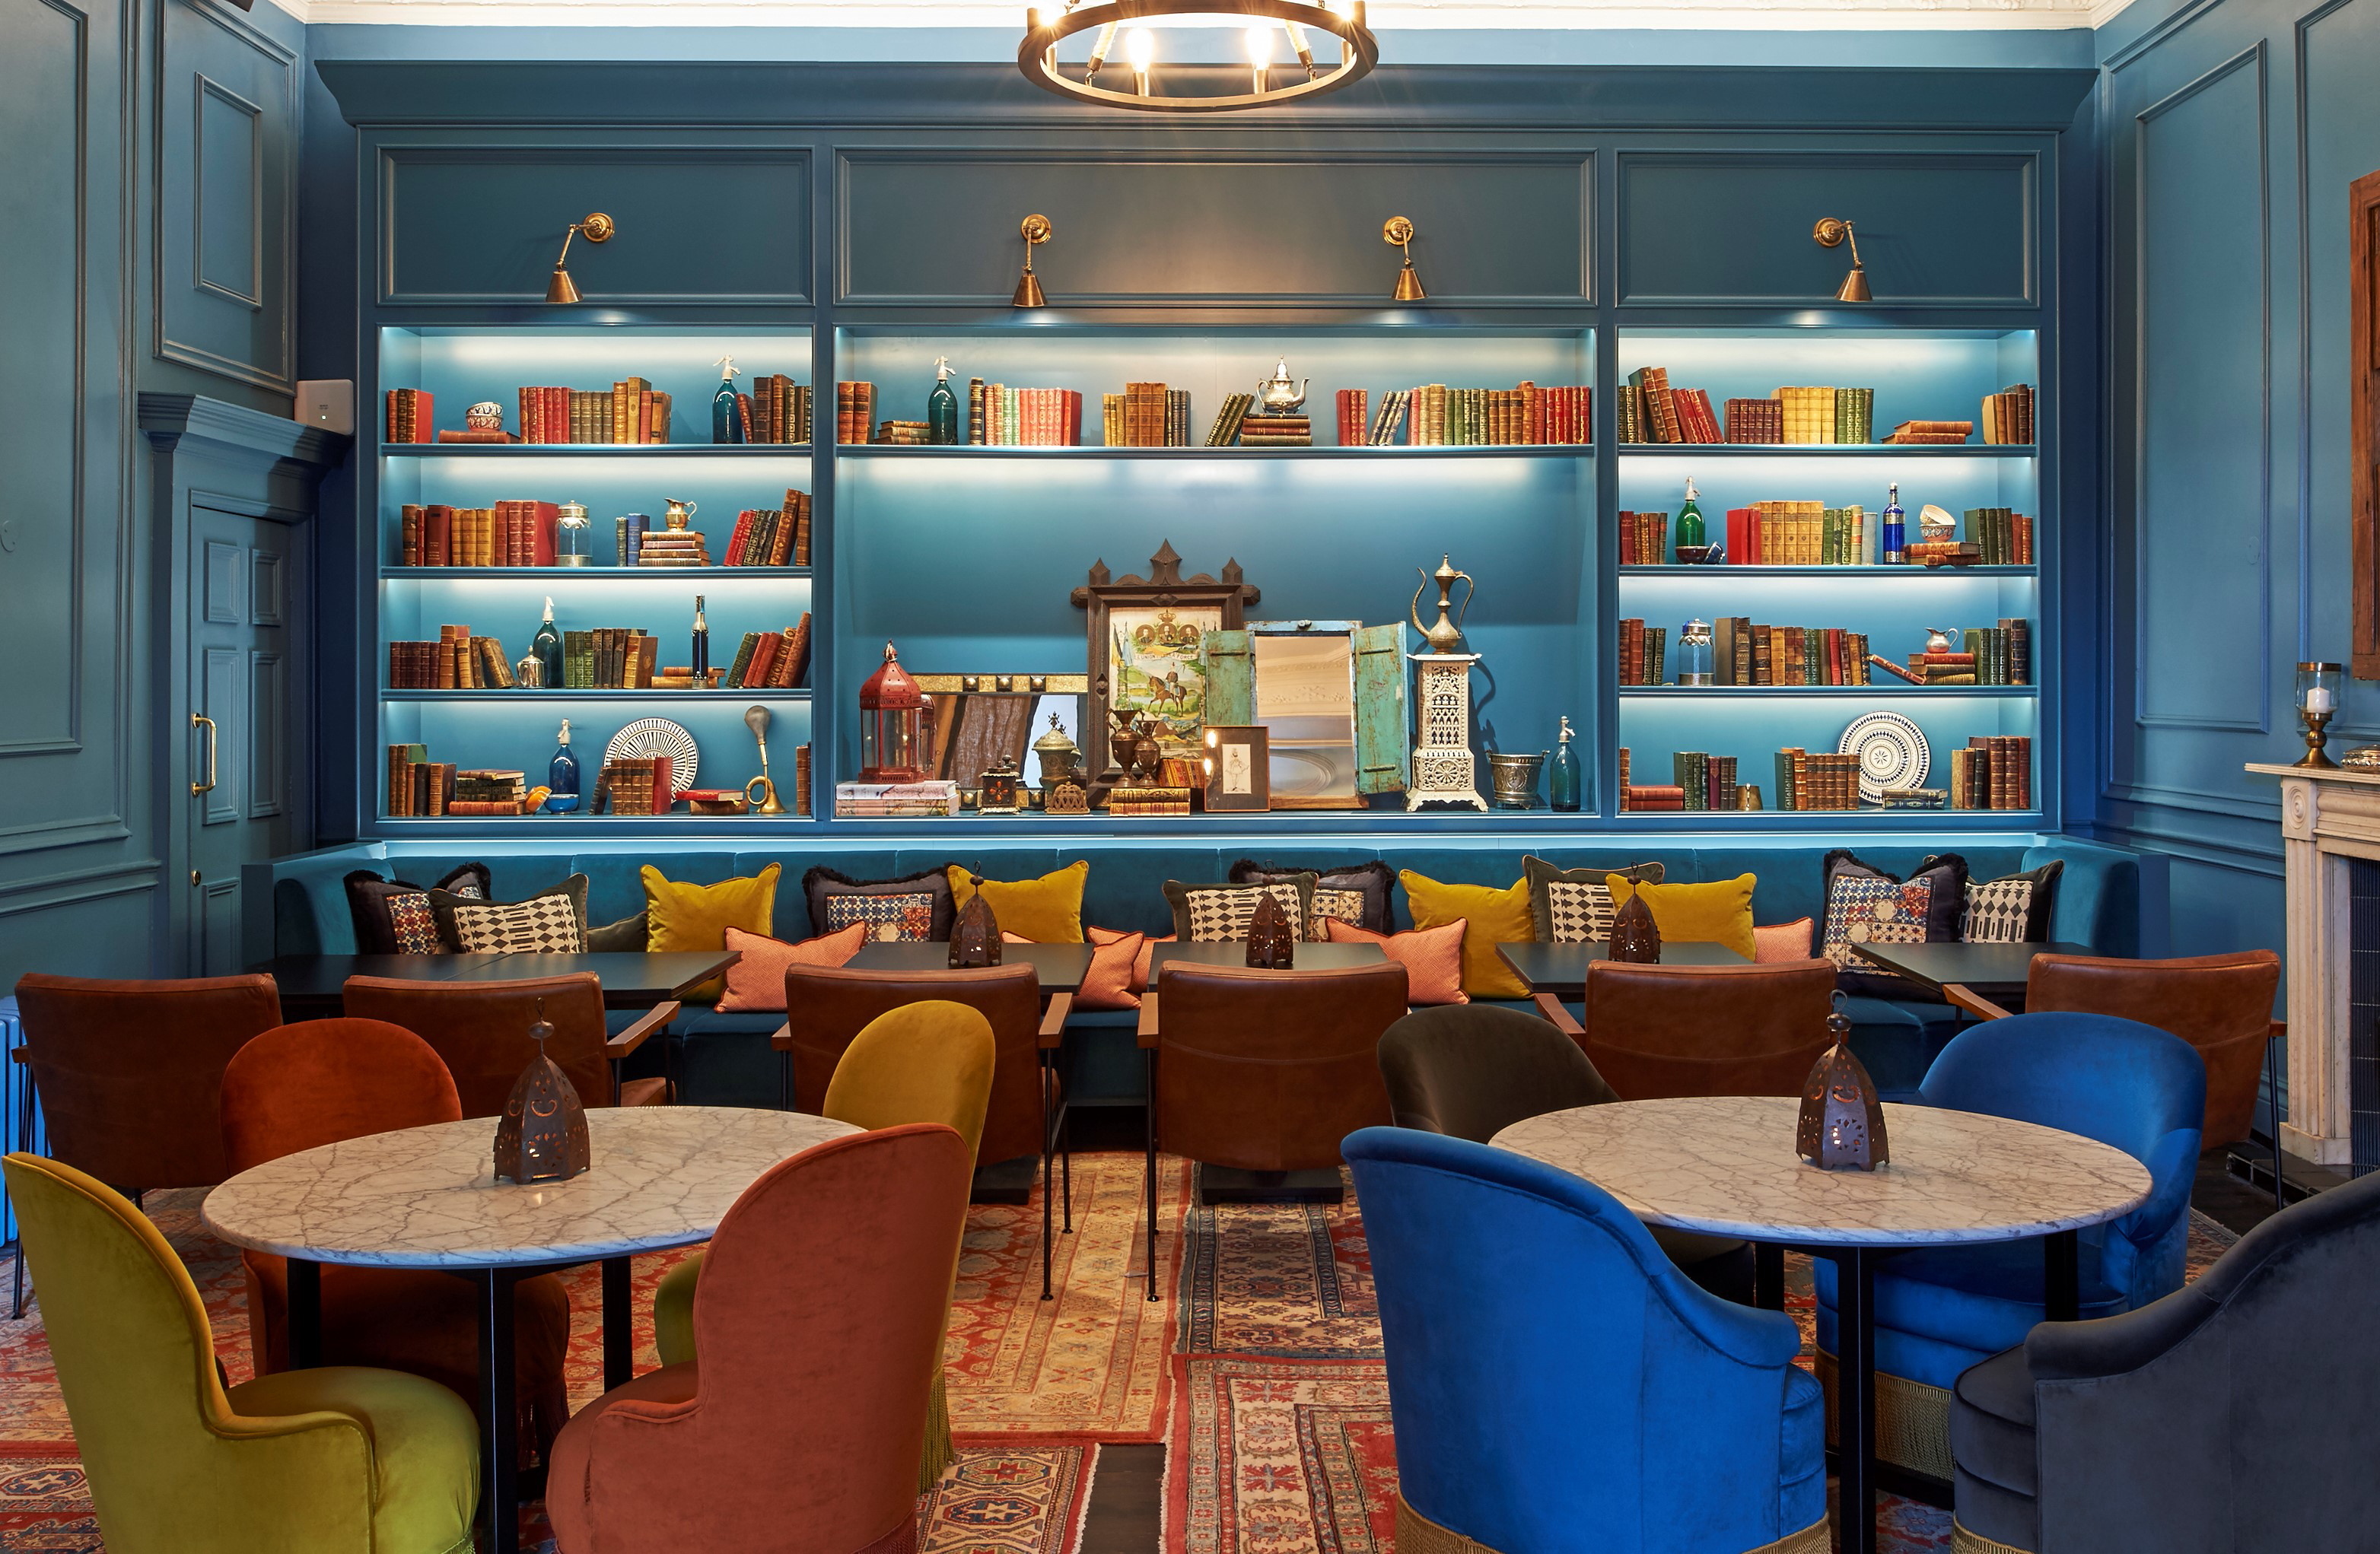 InterContinental Hotels Group has opened the first Kimpton hotel in Scotland. Kimpton Charlotte Square Hotel is in one of Edinburgh’s most beautiful squares in the Georgian New Town, an UNESCO world heritage site. Click to enlarge.